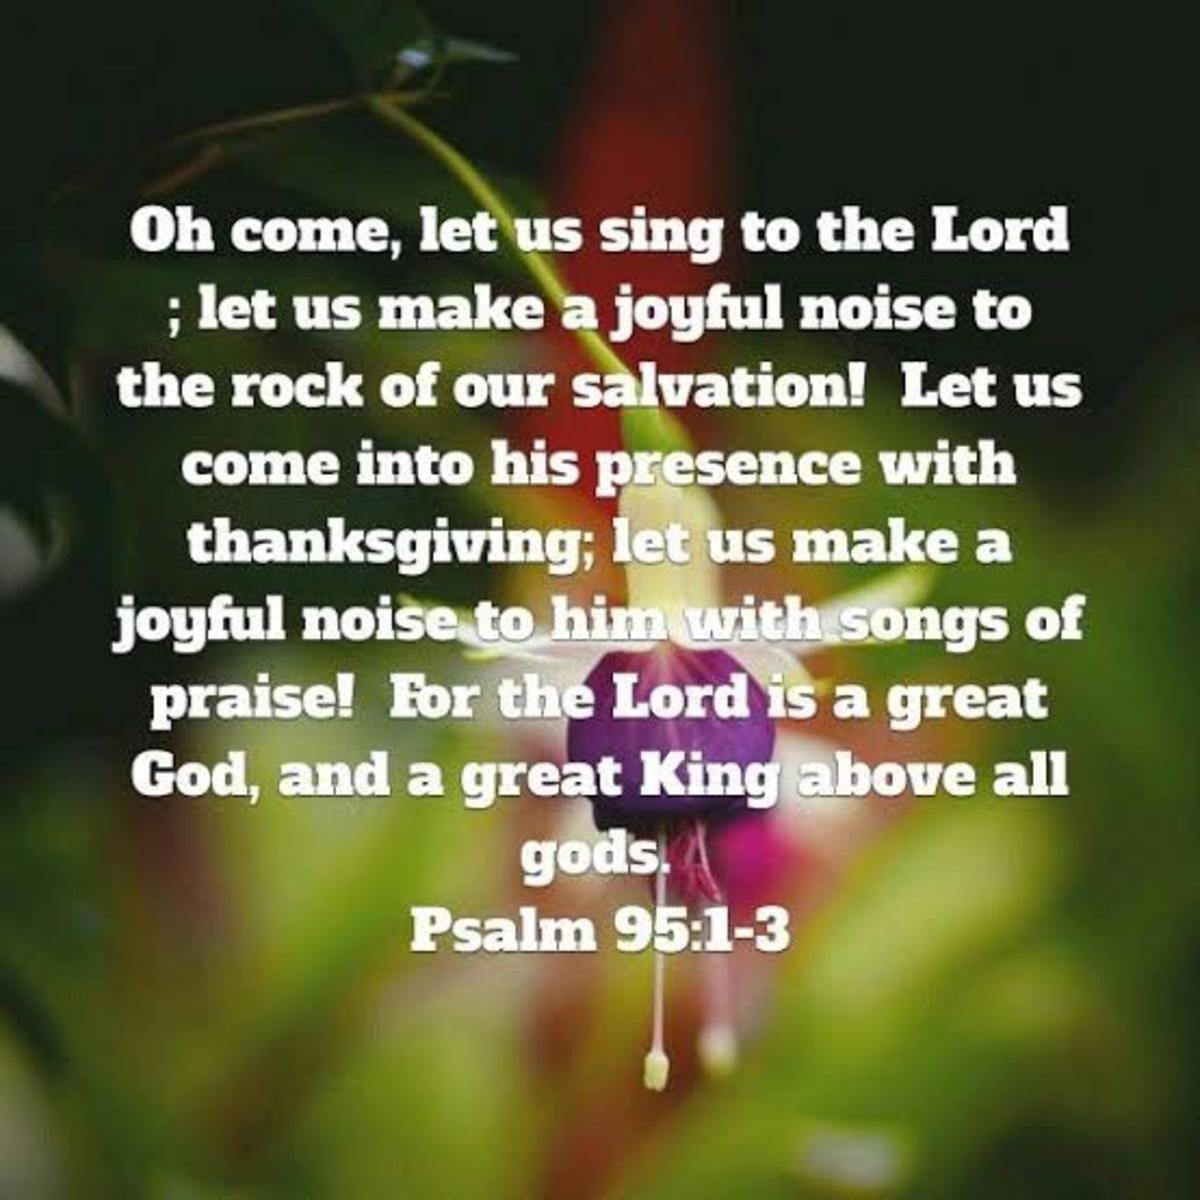 a-song-come-let-us-praise-the-lord